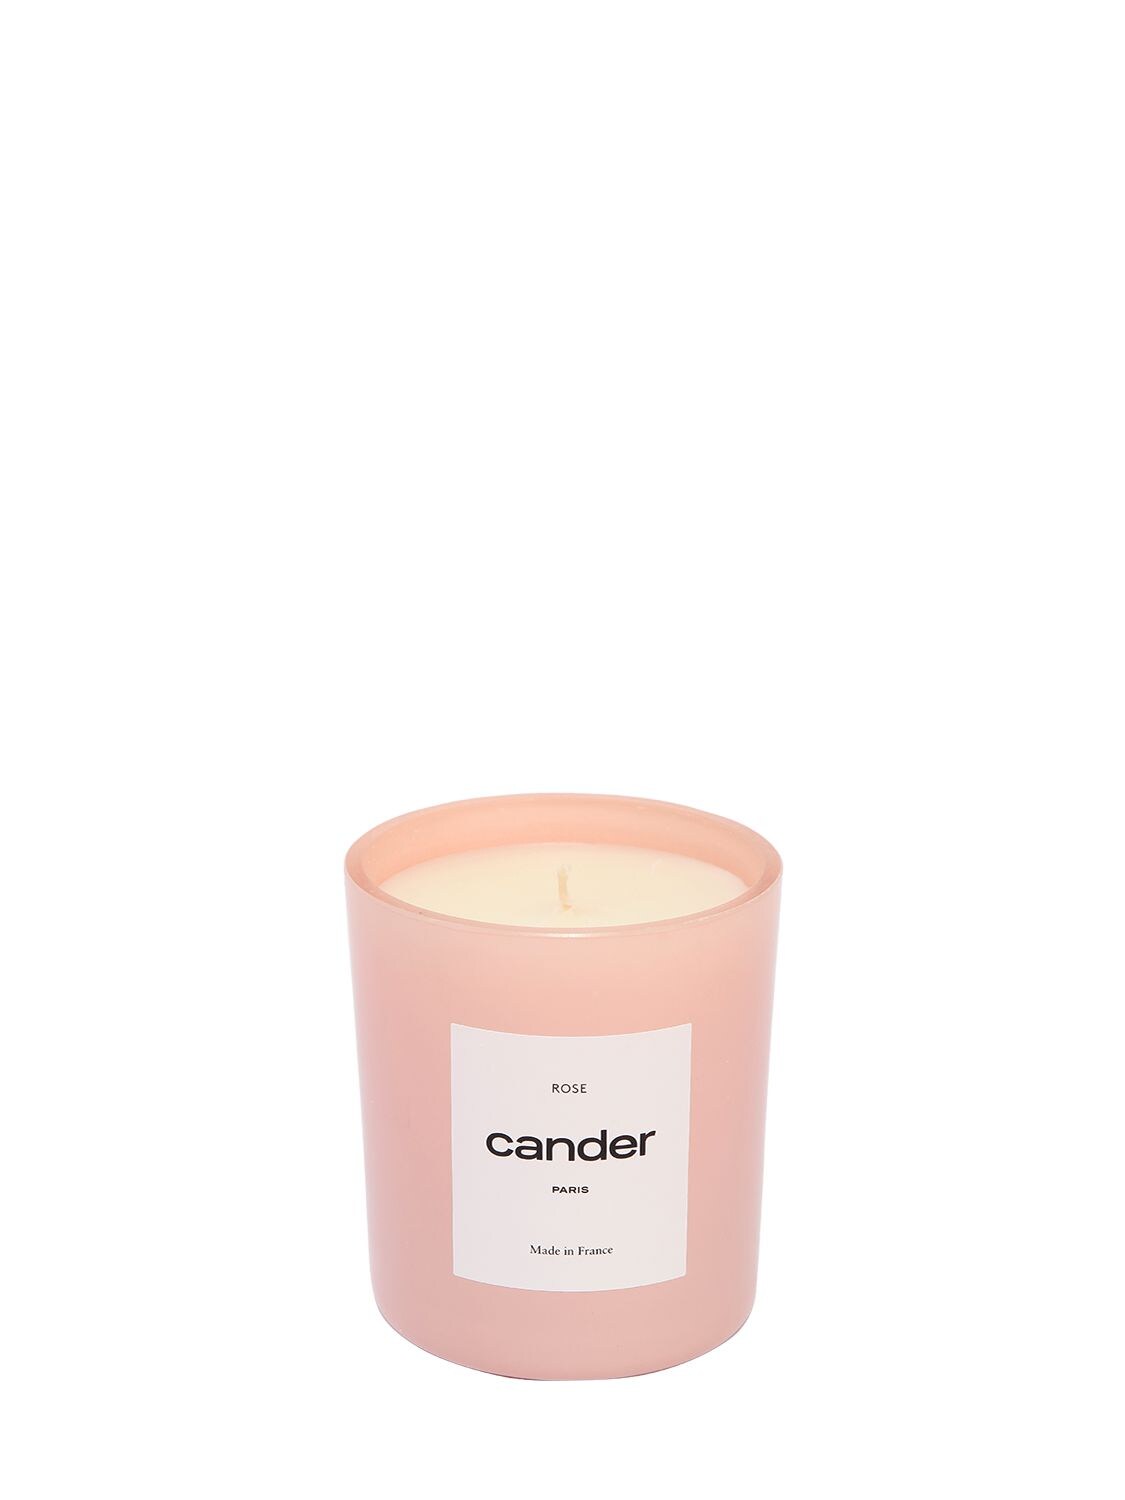 Cander Paris Rose Scented Candle In Pink